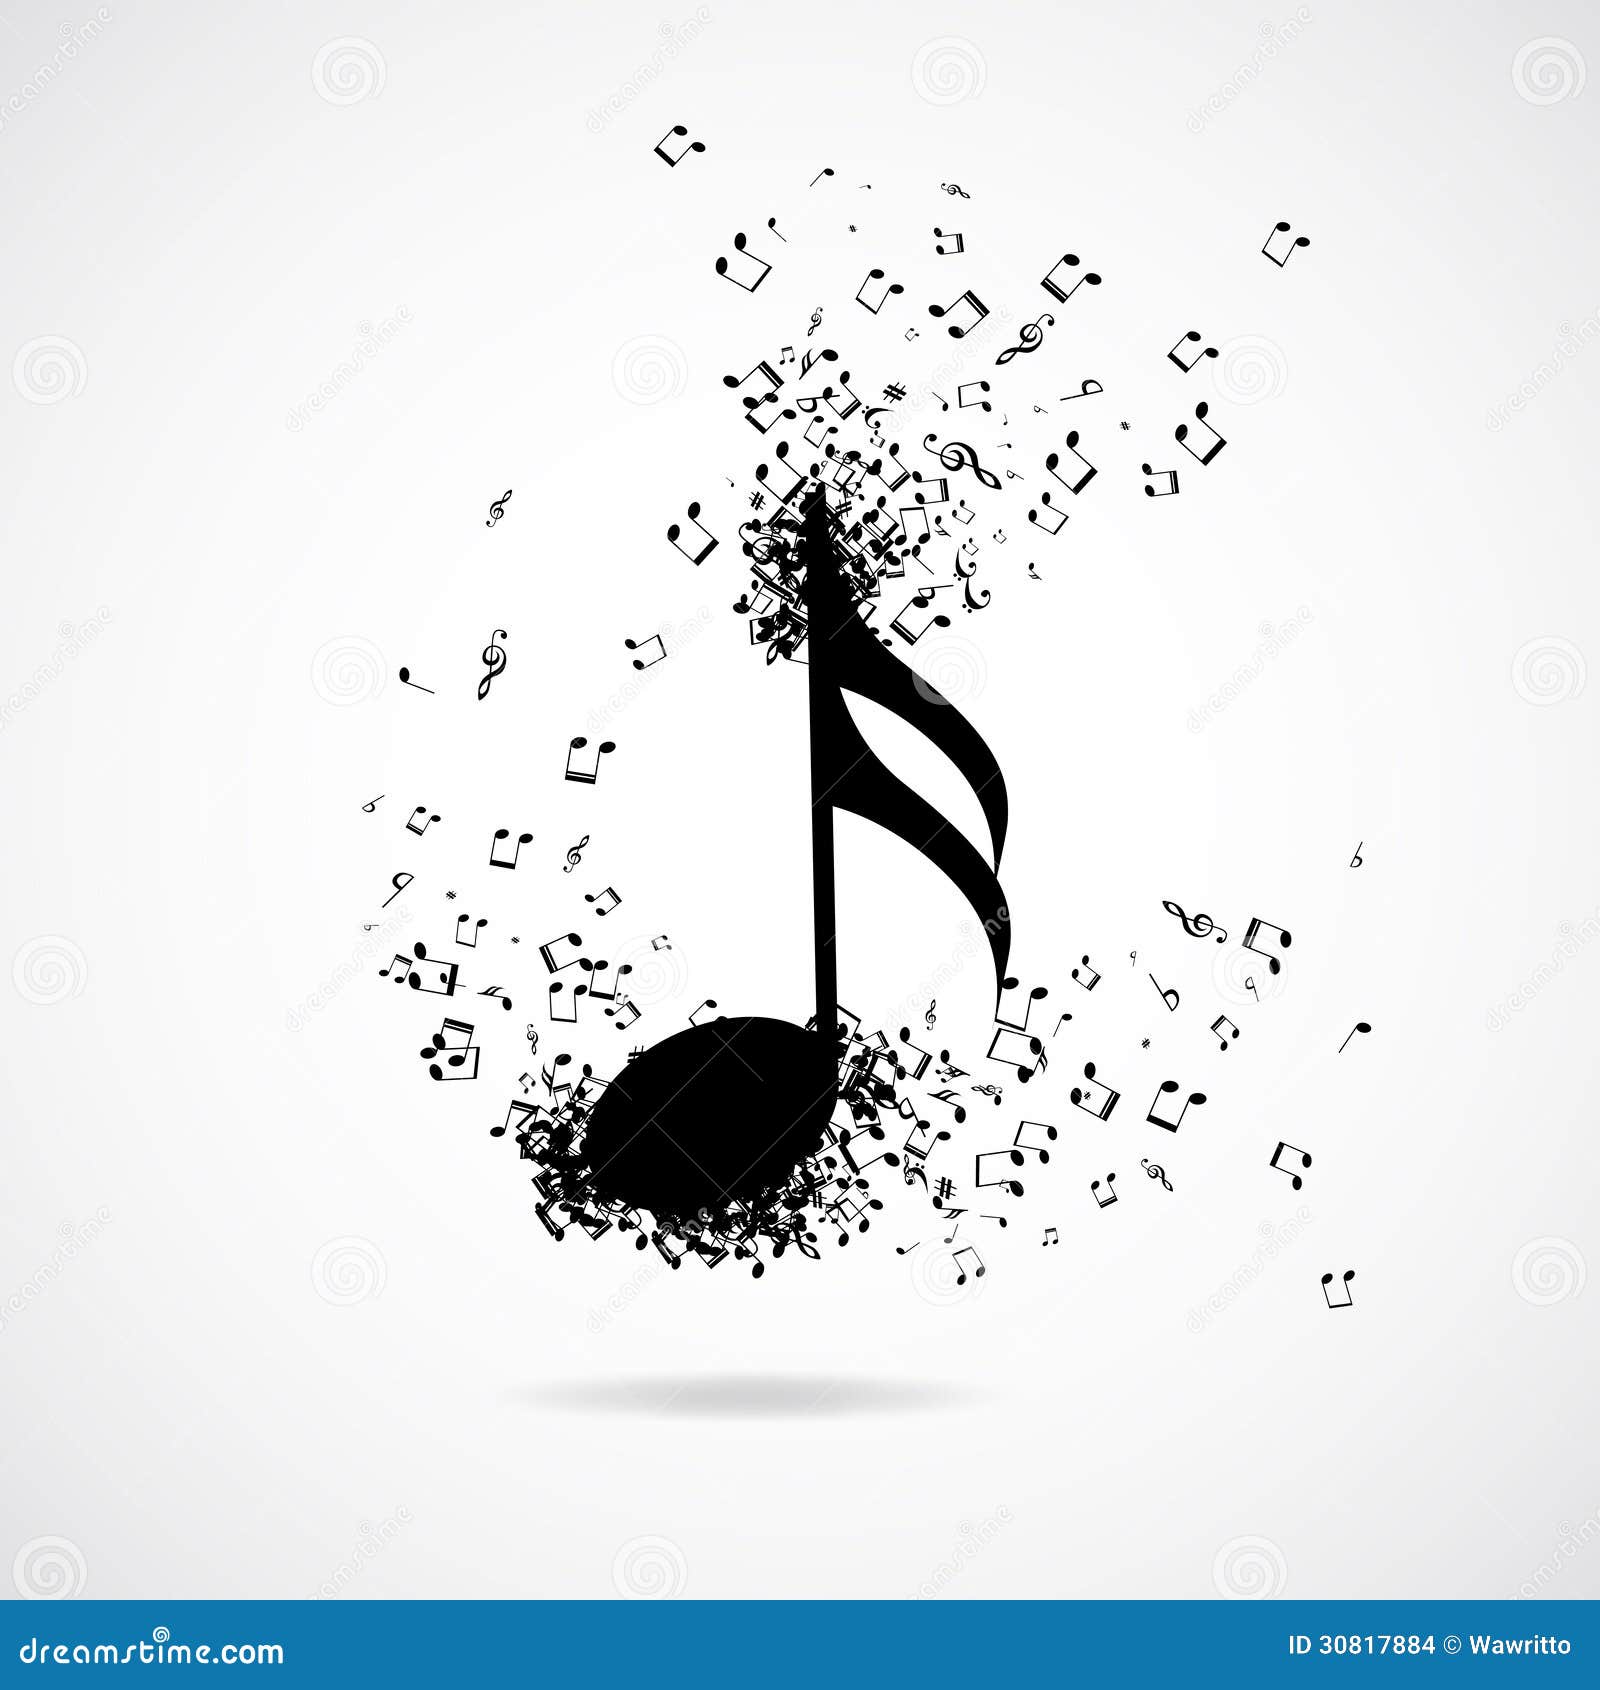 music note with burst effect